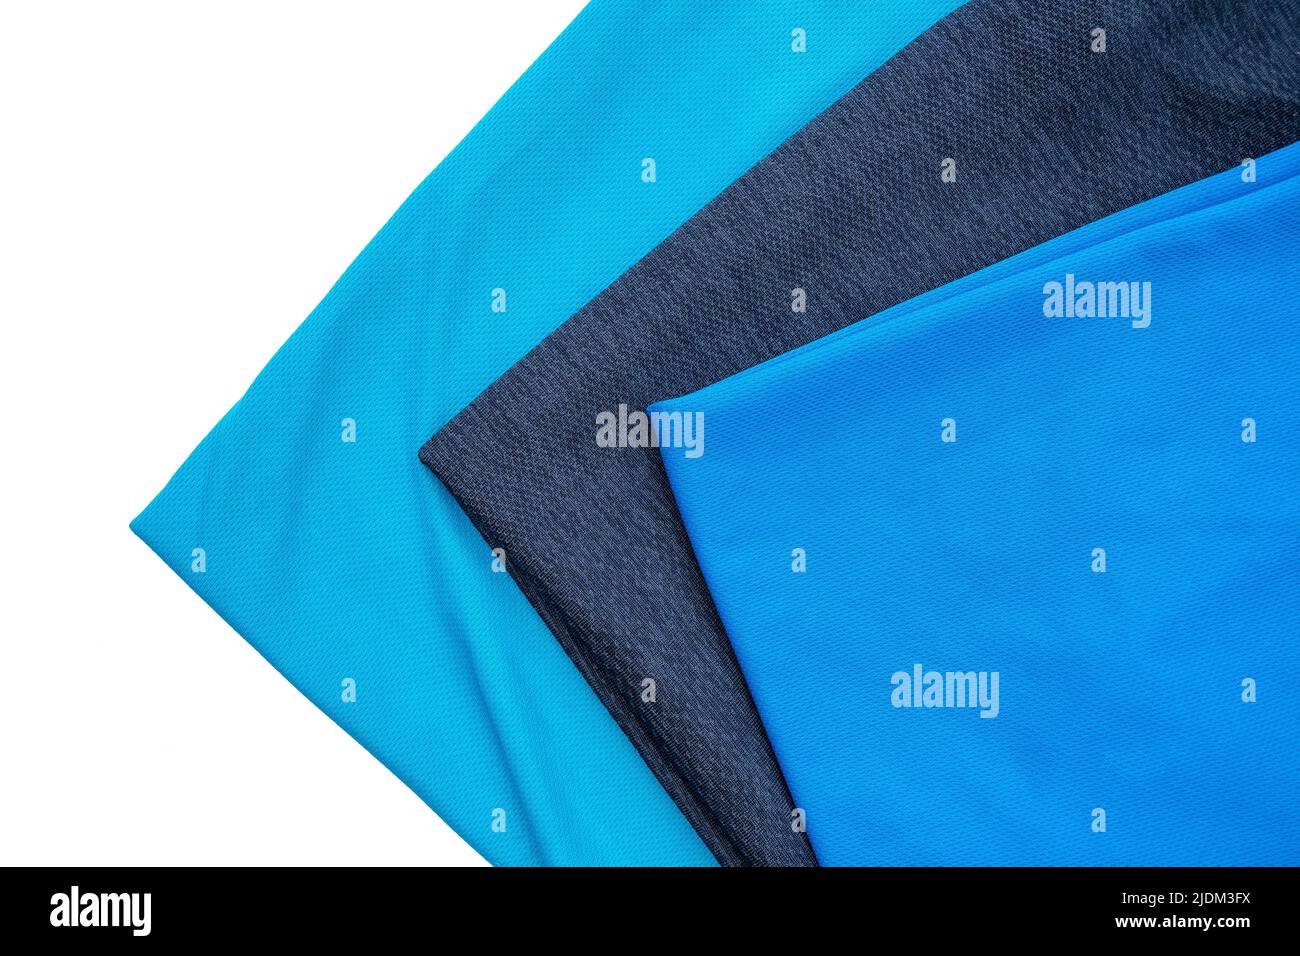 Three kind of blue polyester sport t shirts isolated on white, top view Stock Photo